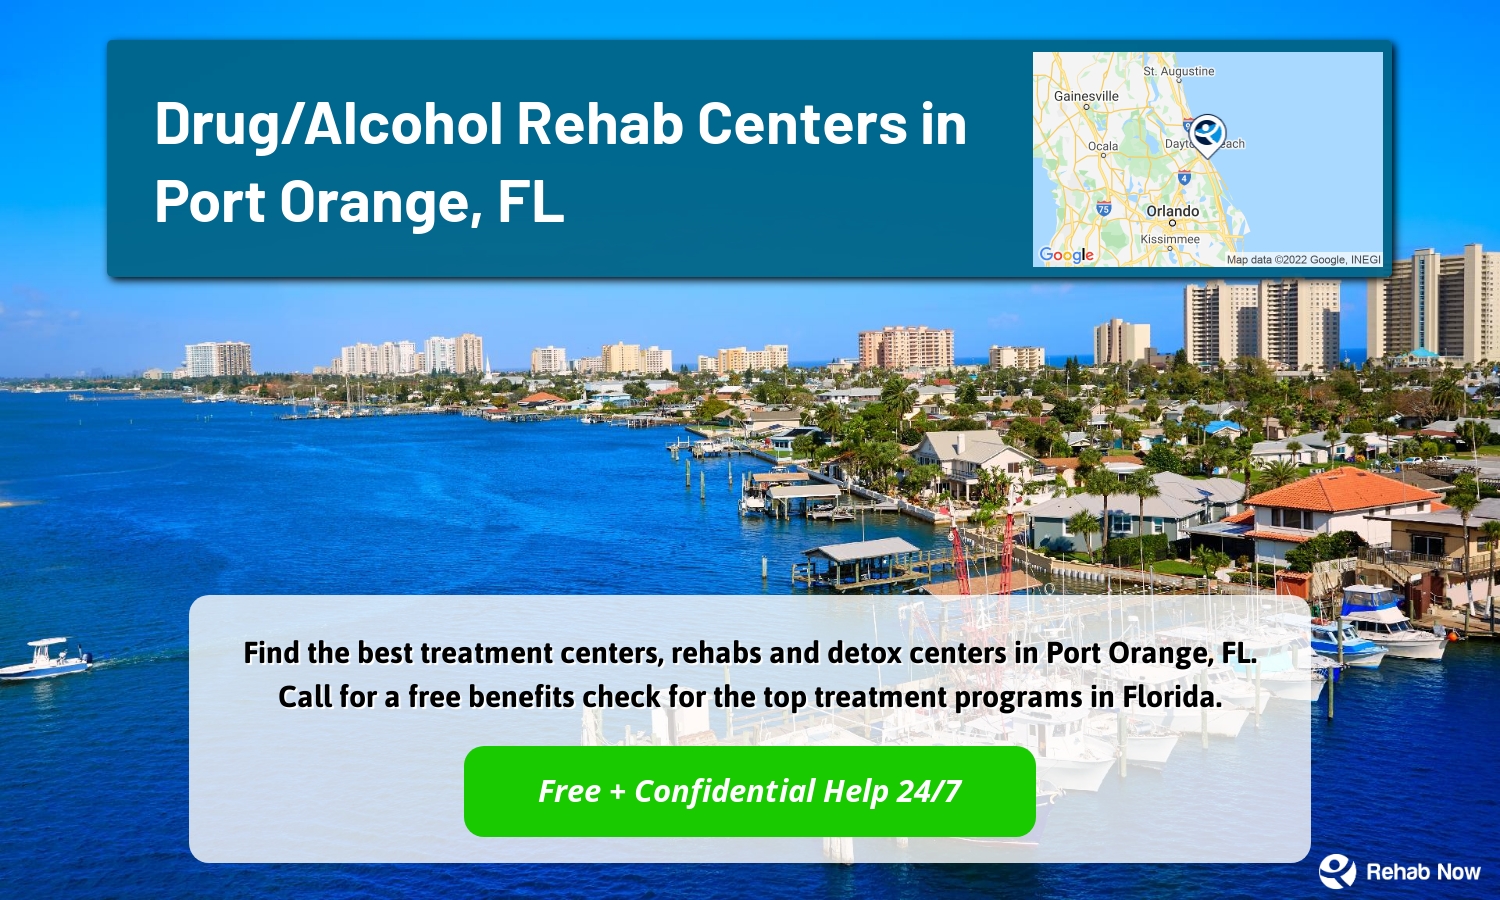 Find the best treatment centers, rehabs and detox centers in Port Orange, FL. Call for a free benefits check for the top treatment programs in Florida.